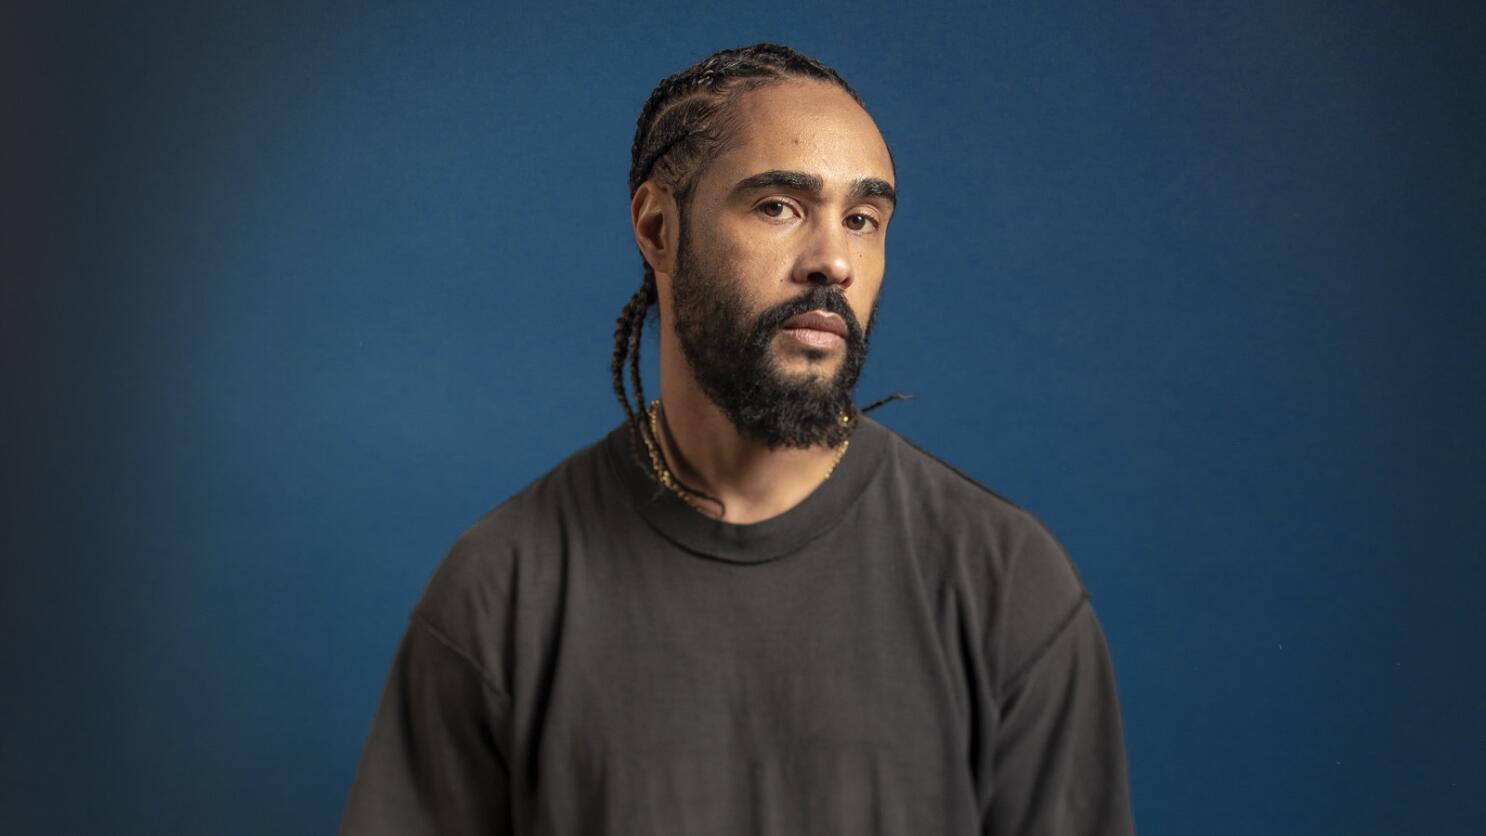 What They're Rocking // Jerry Lorenzo